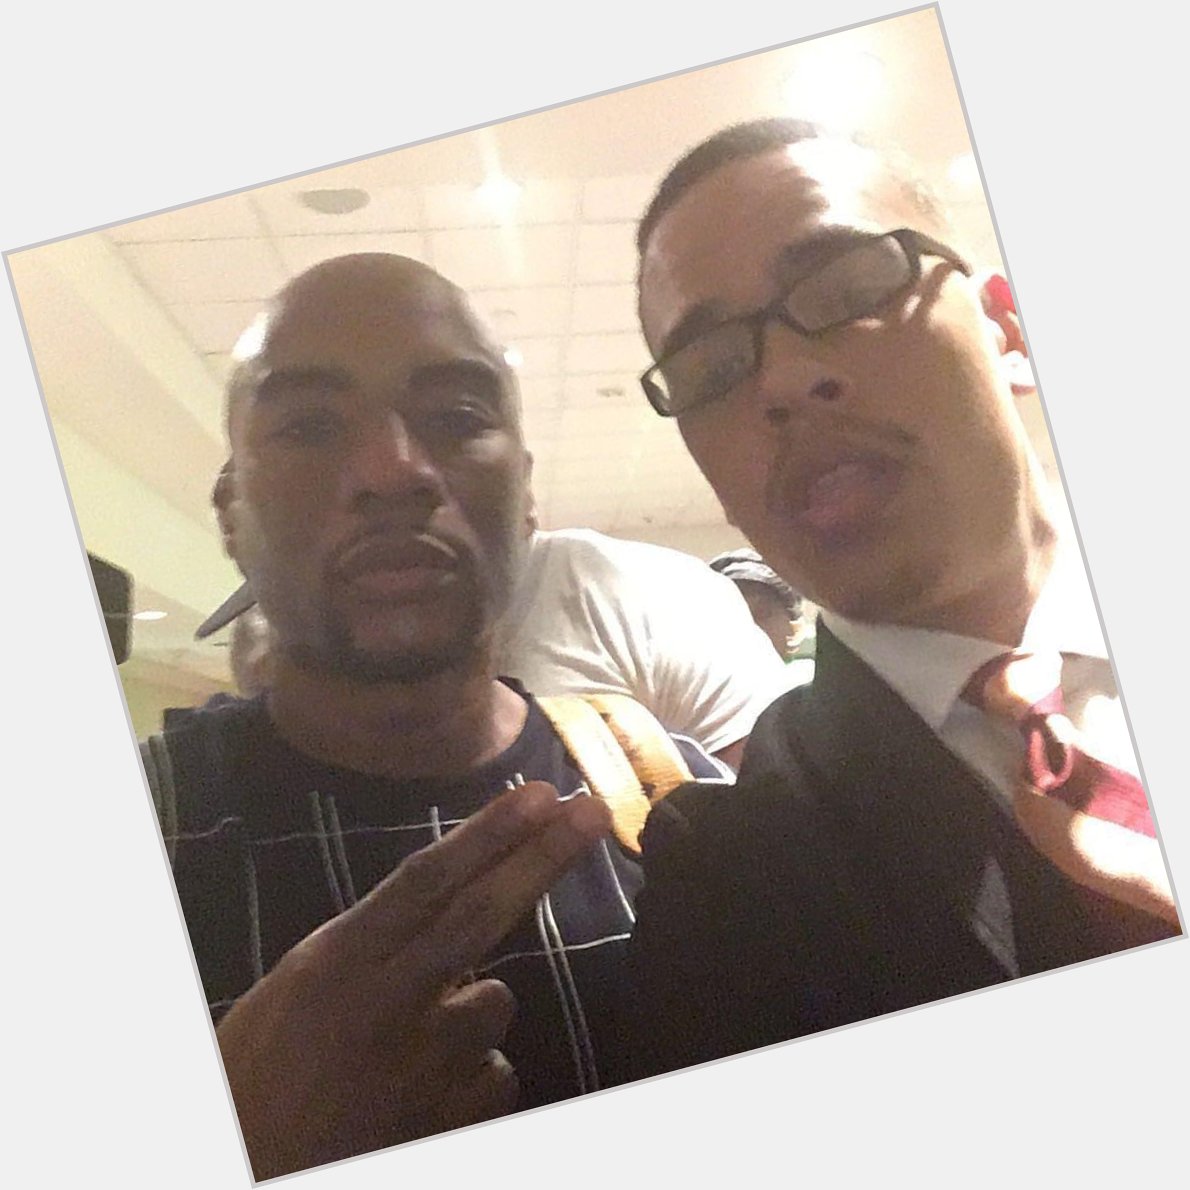 2016 pic and meeting with Charlamagne Tha God who is celebrating 43 years today! Happy Birthday King! 